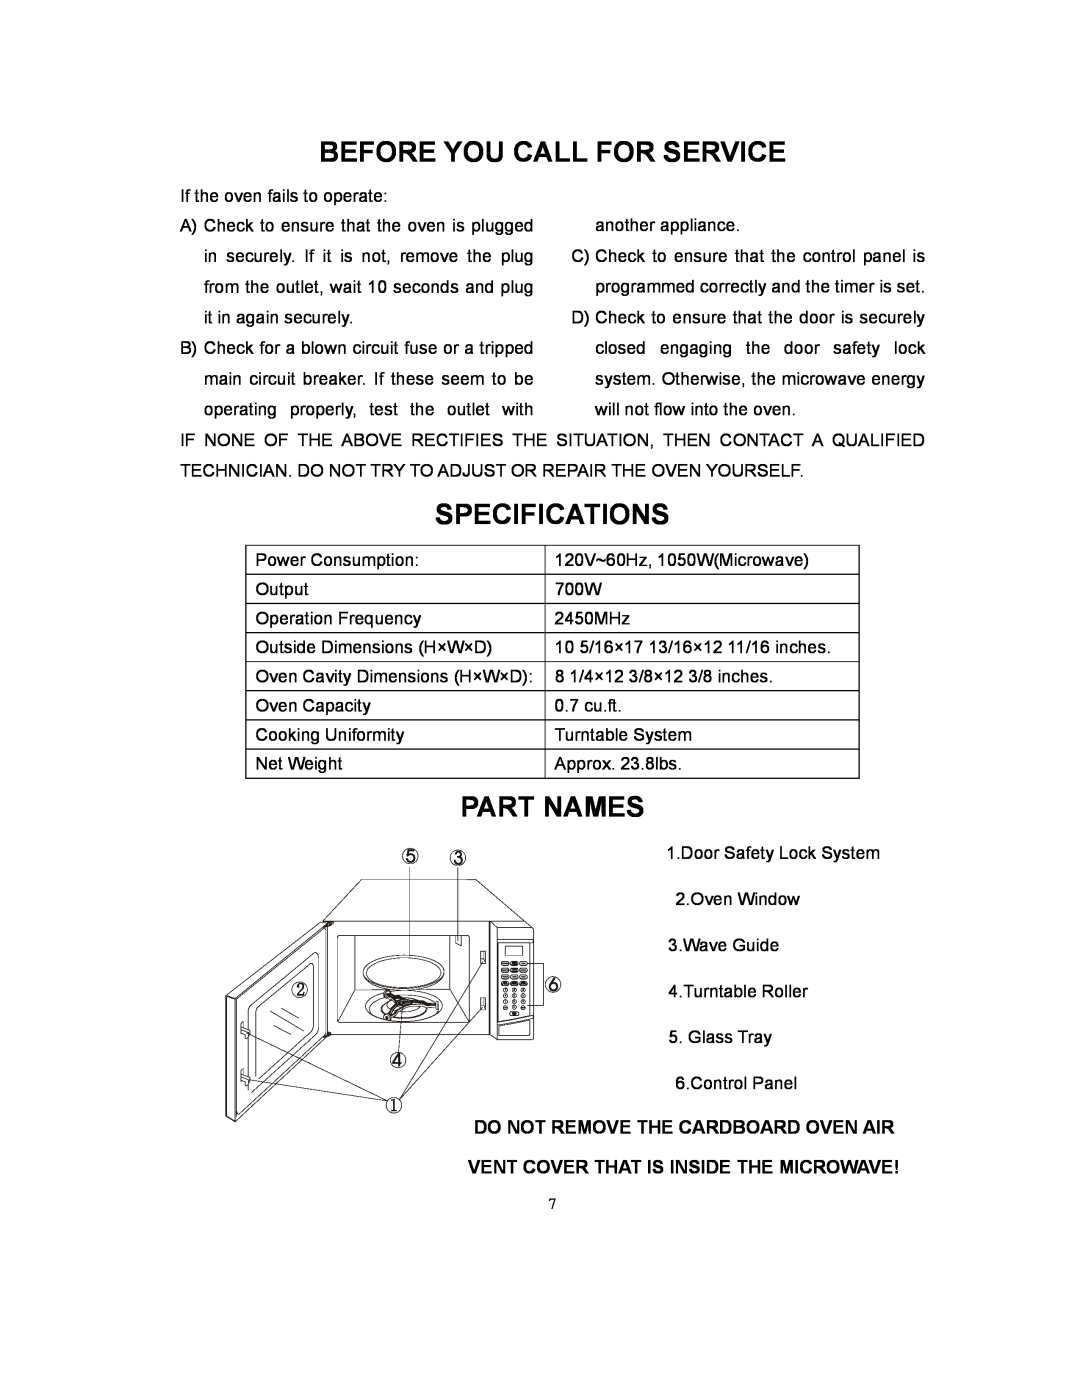 Kenmore 87039 owner manual Before You Call For Service, Specifications, Part Names, Do Not Remove The Cardboard Oven Air 